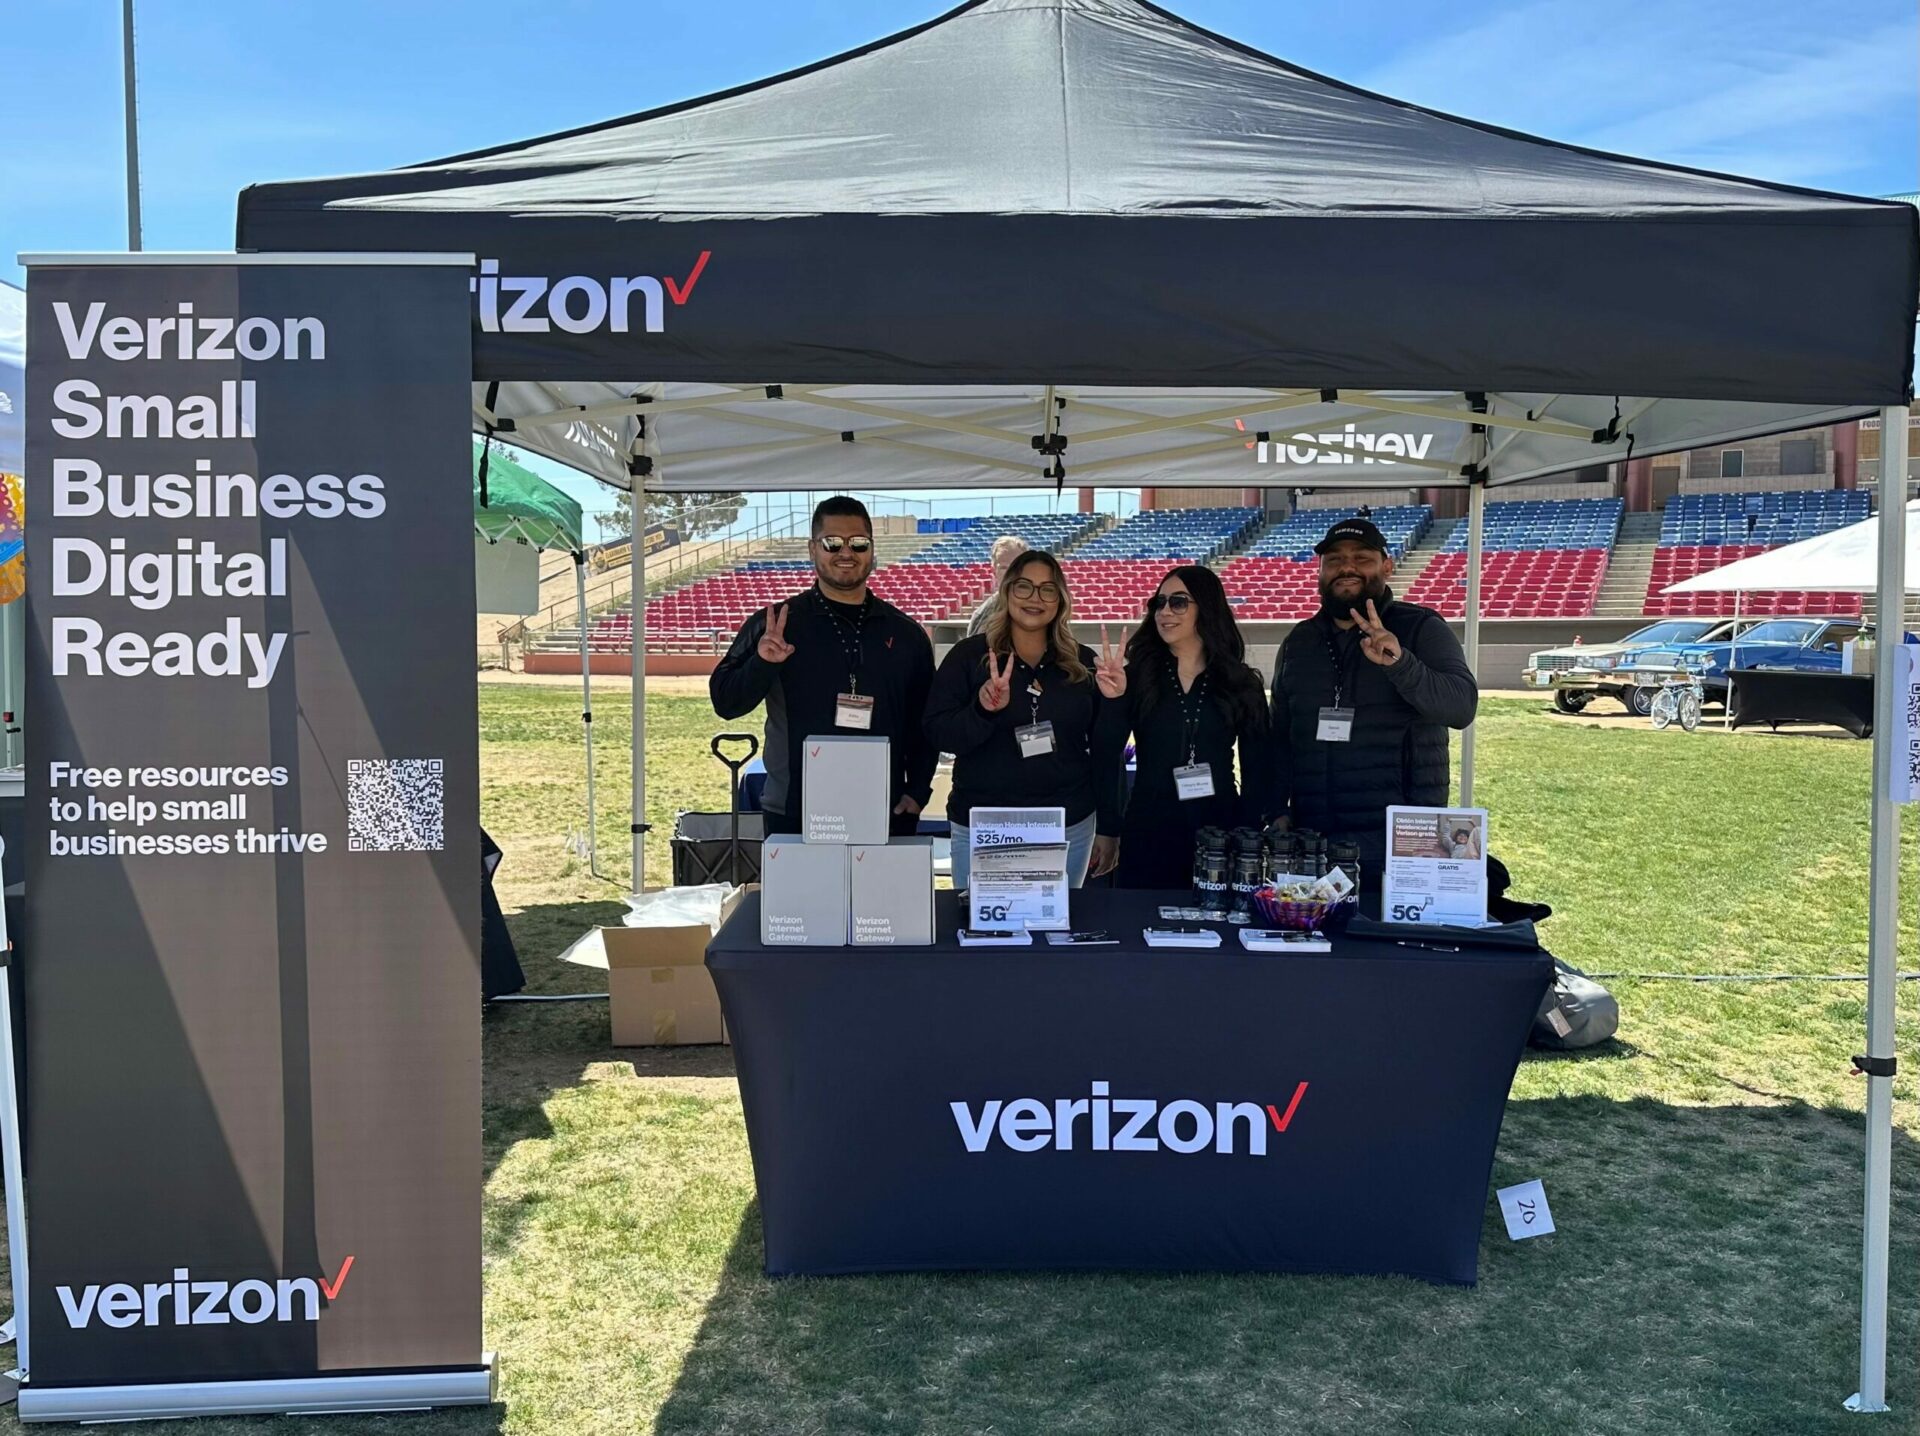 Verizon brings the Small Business Digital Ready experience to live event in Cleveland